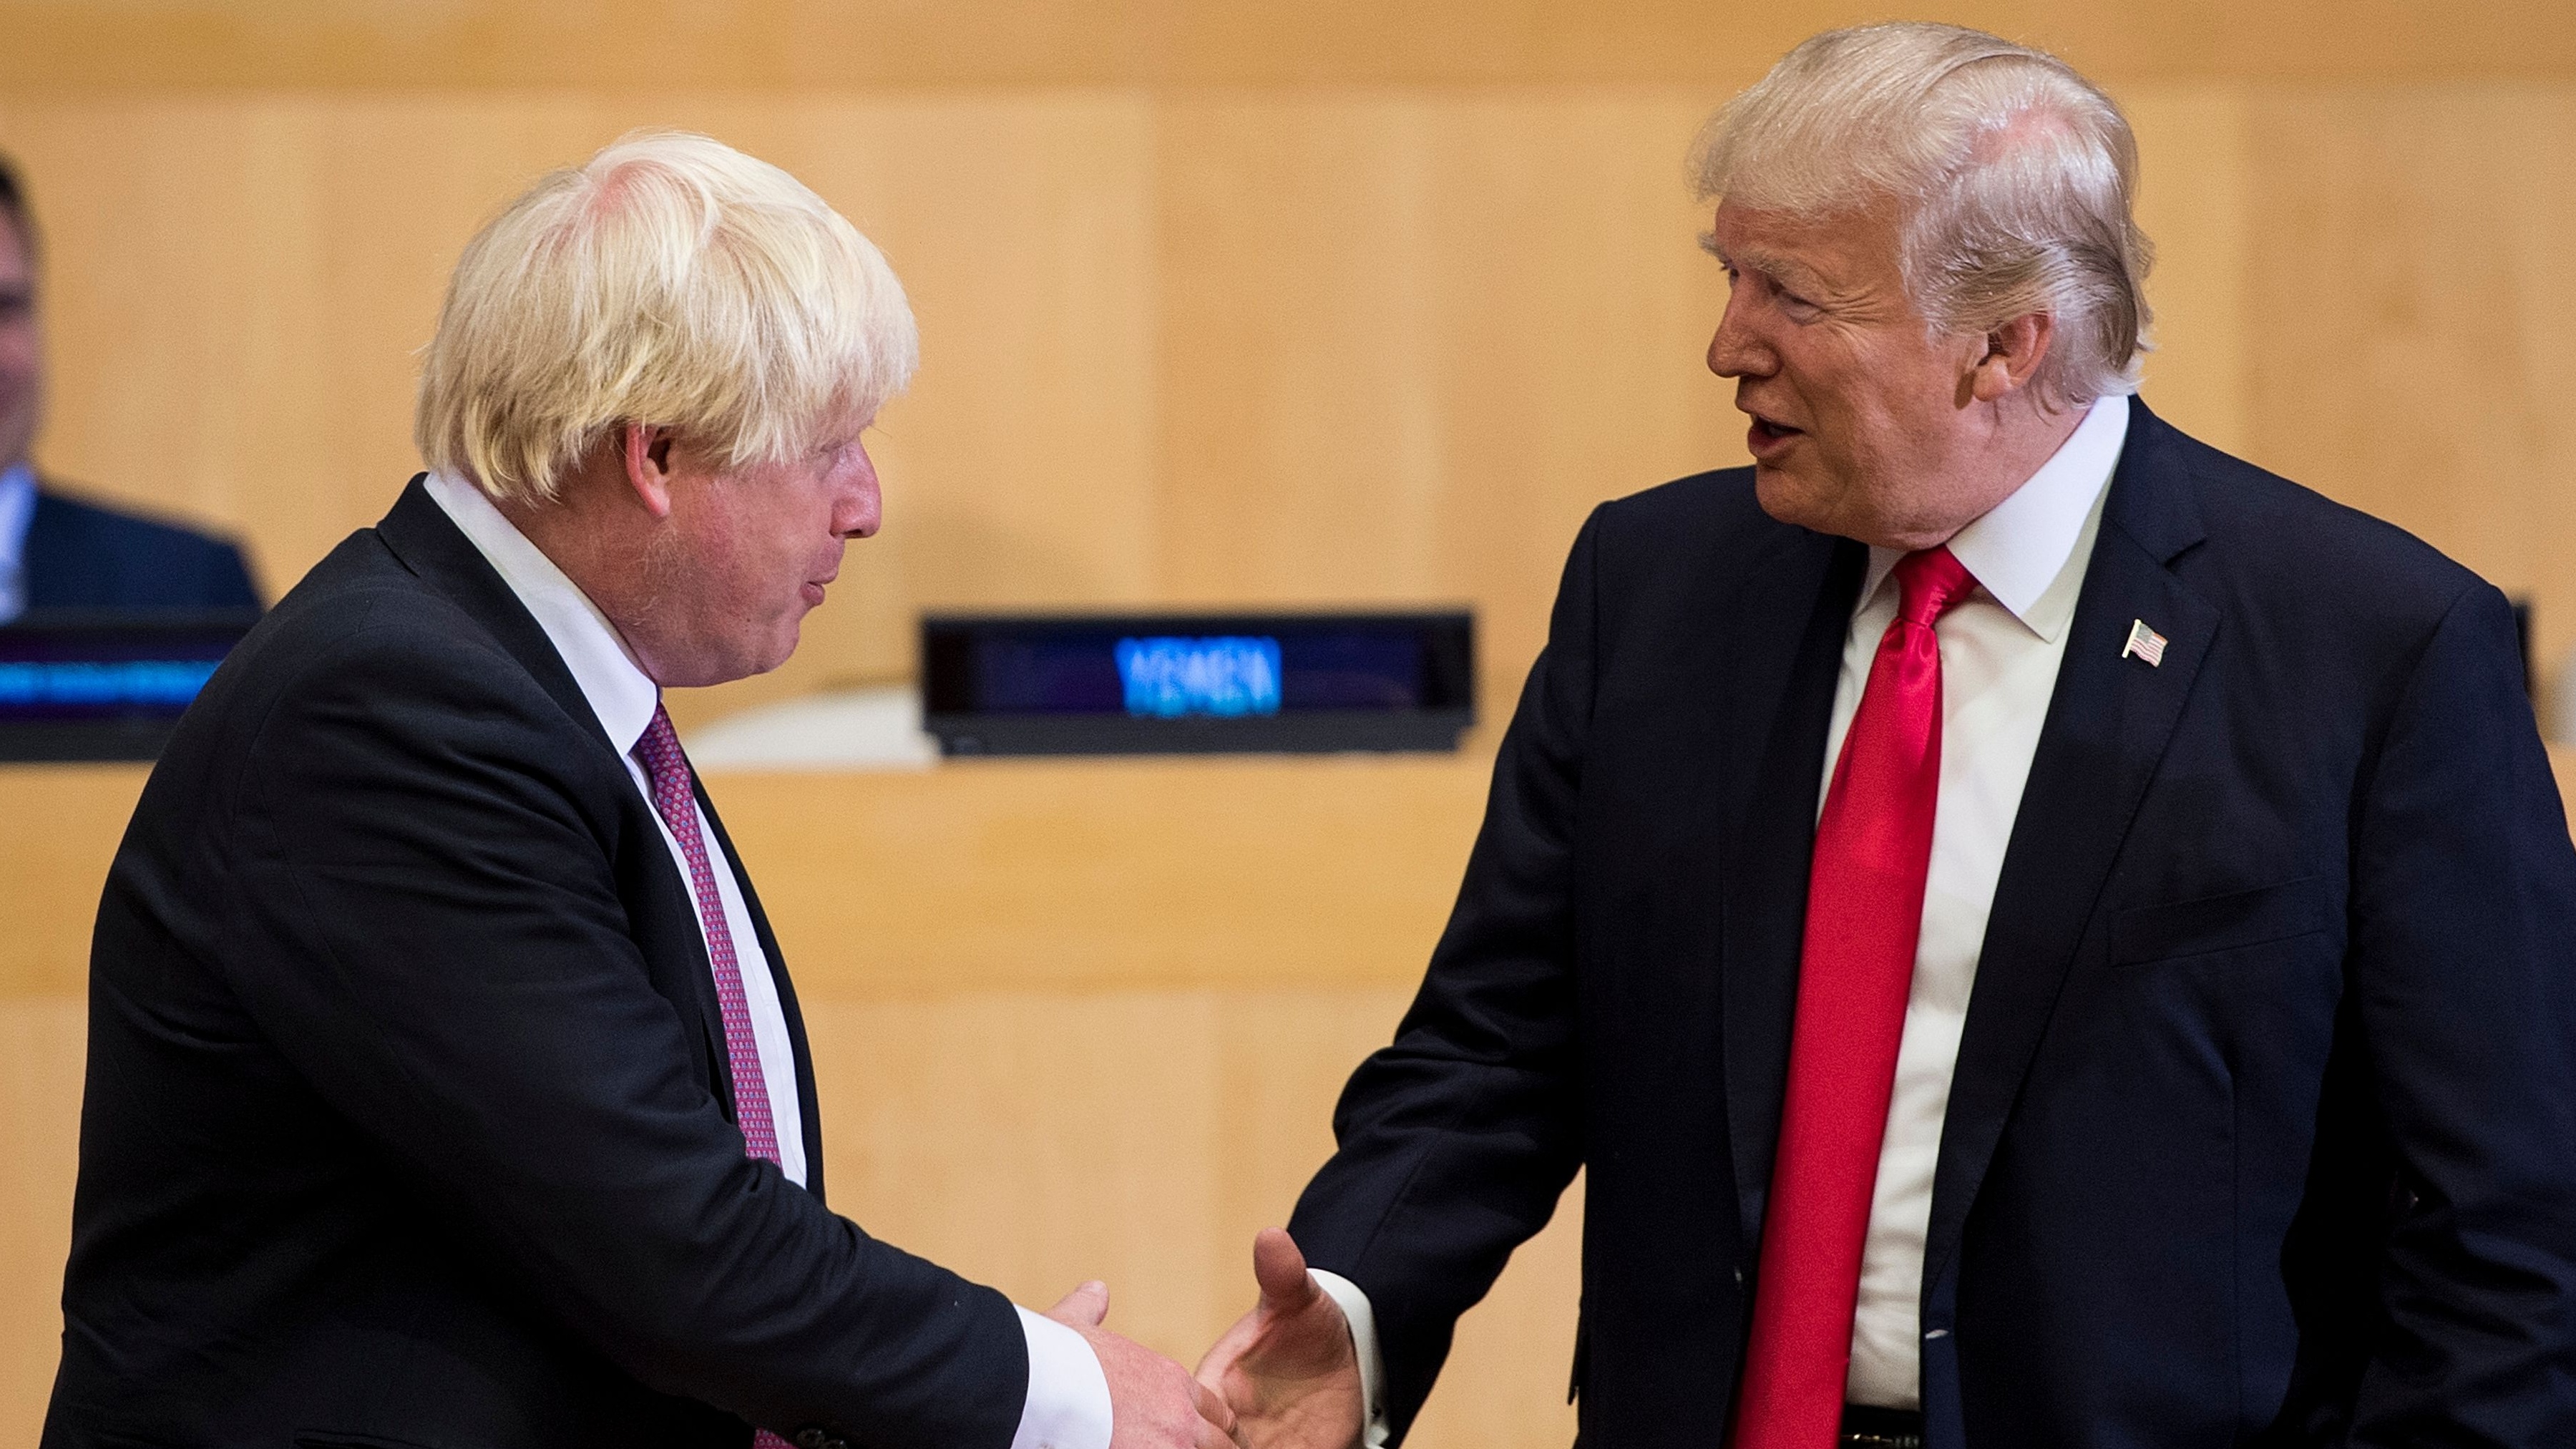 Boris Johnson and Donald Trump greet before a meeting on United Nations Reform at the UN headquarters in New York